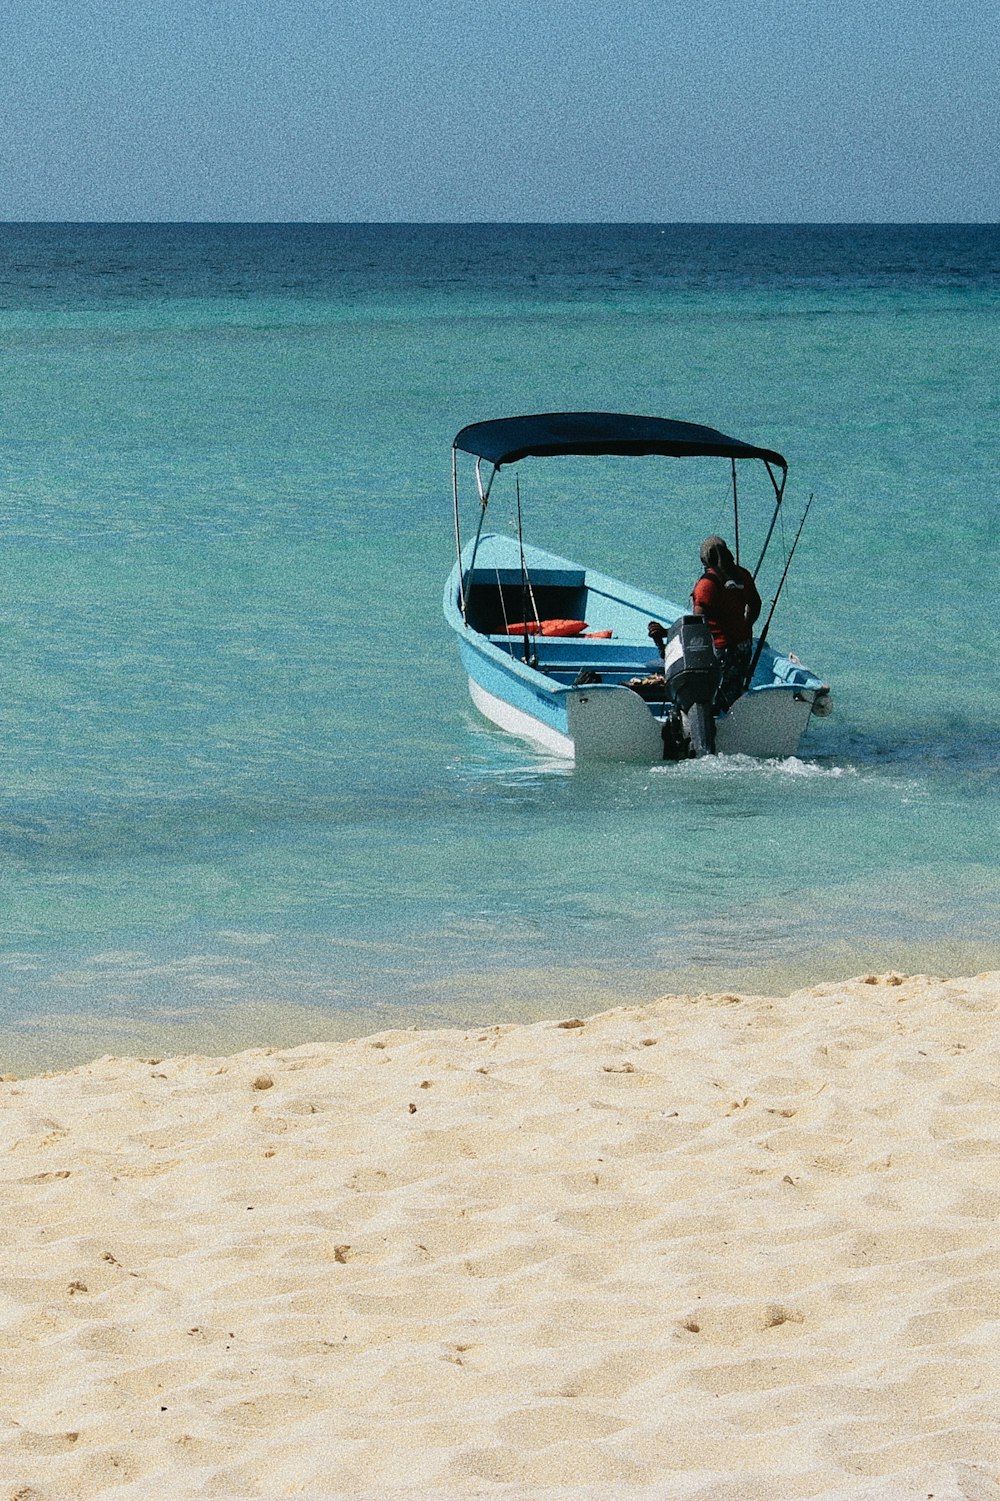 man in black shirt sitting on white and blue boat on sea during daytime